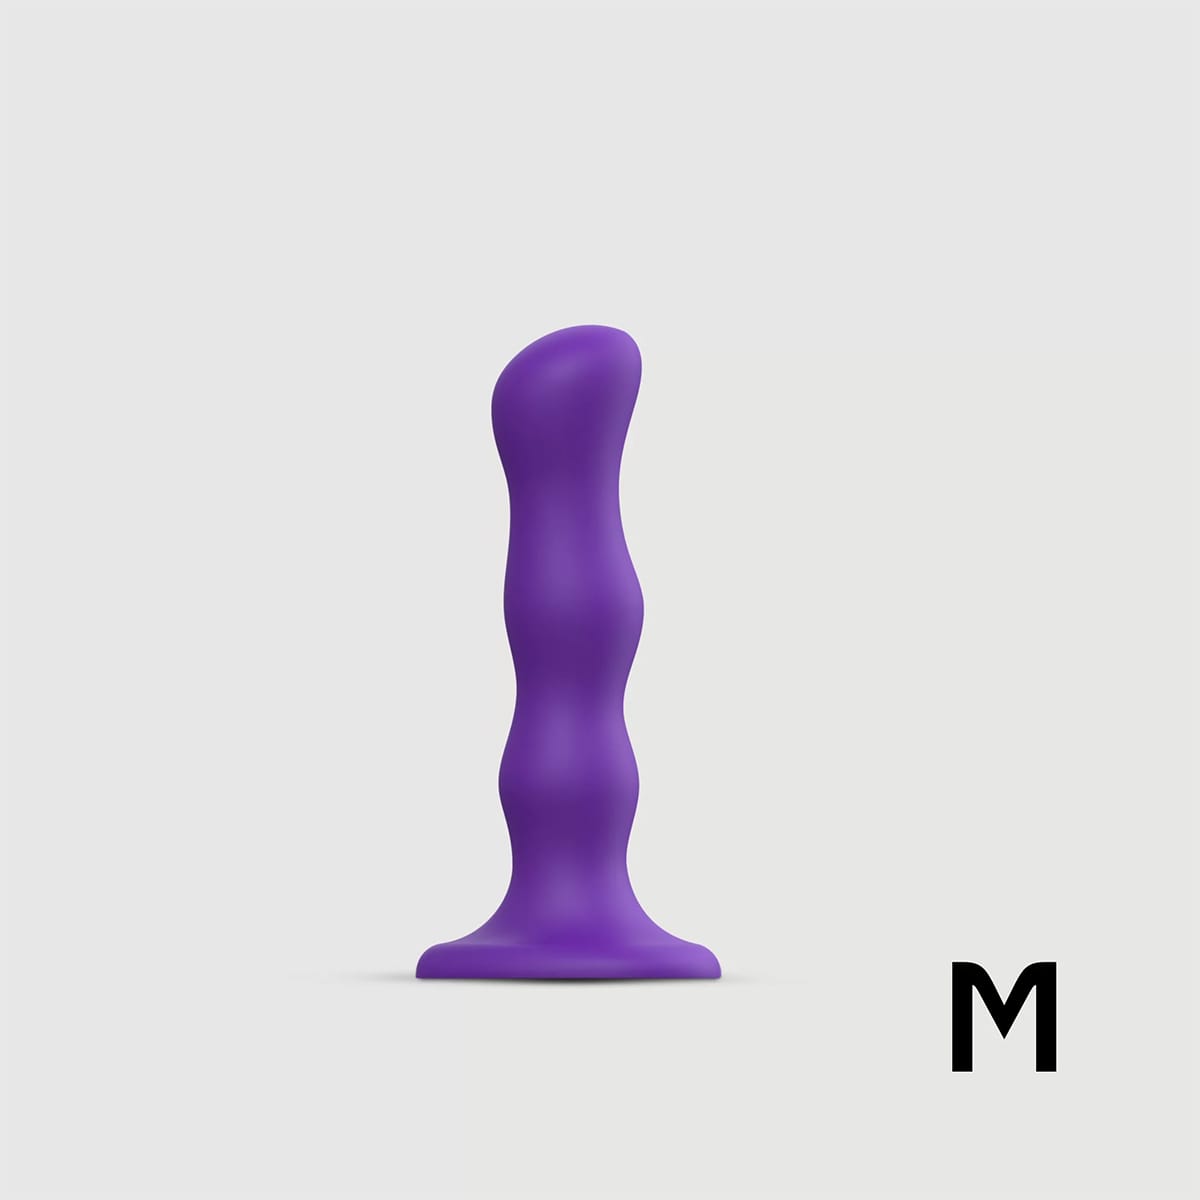 Buy Strap On Me Geisha Ball Dil Medium   Purple  long and 1.41 thick dildo made by Strap-On-Me.